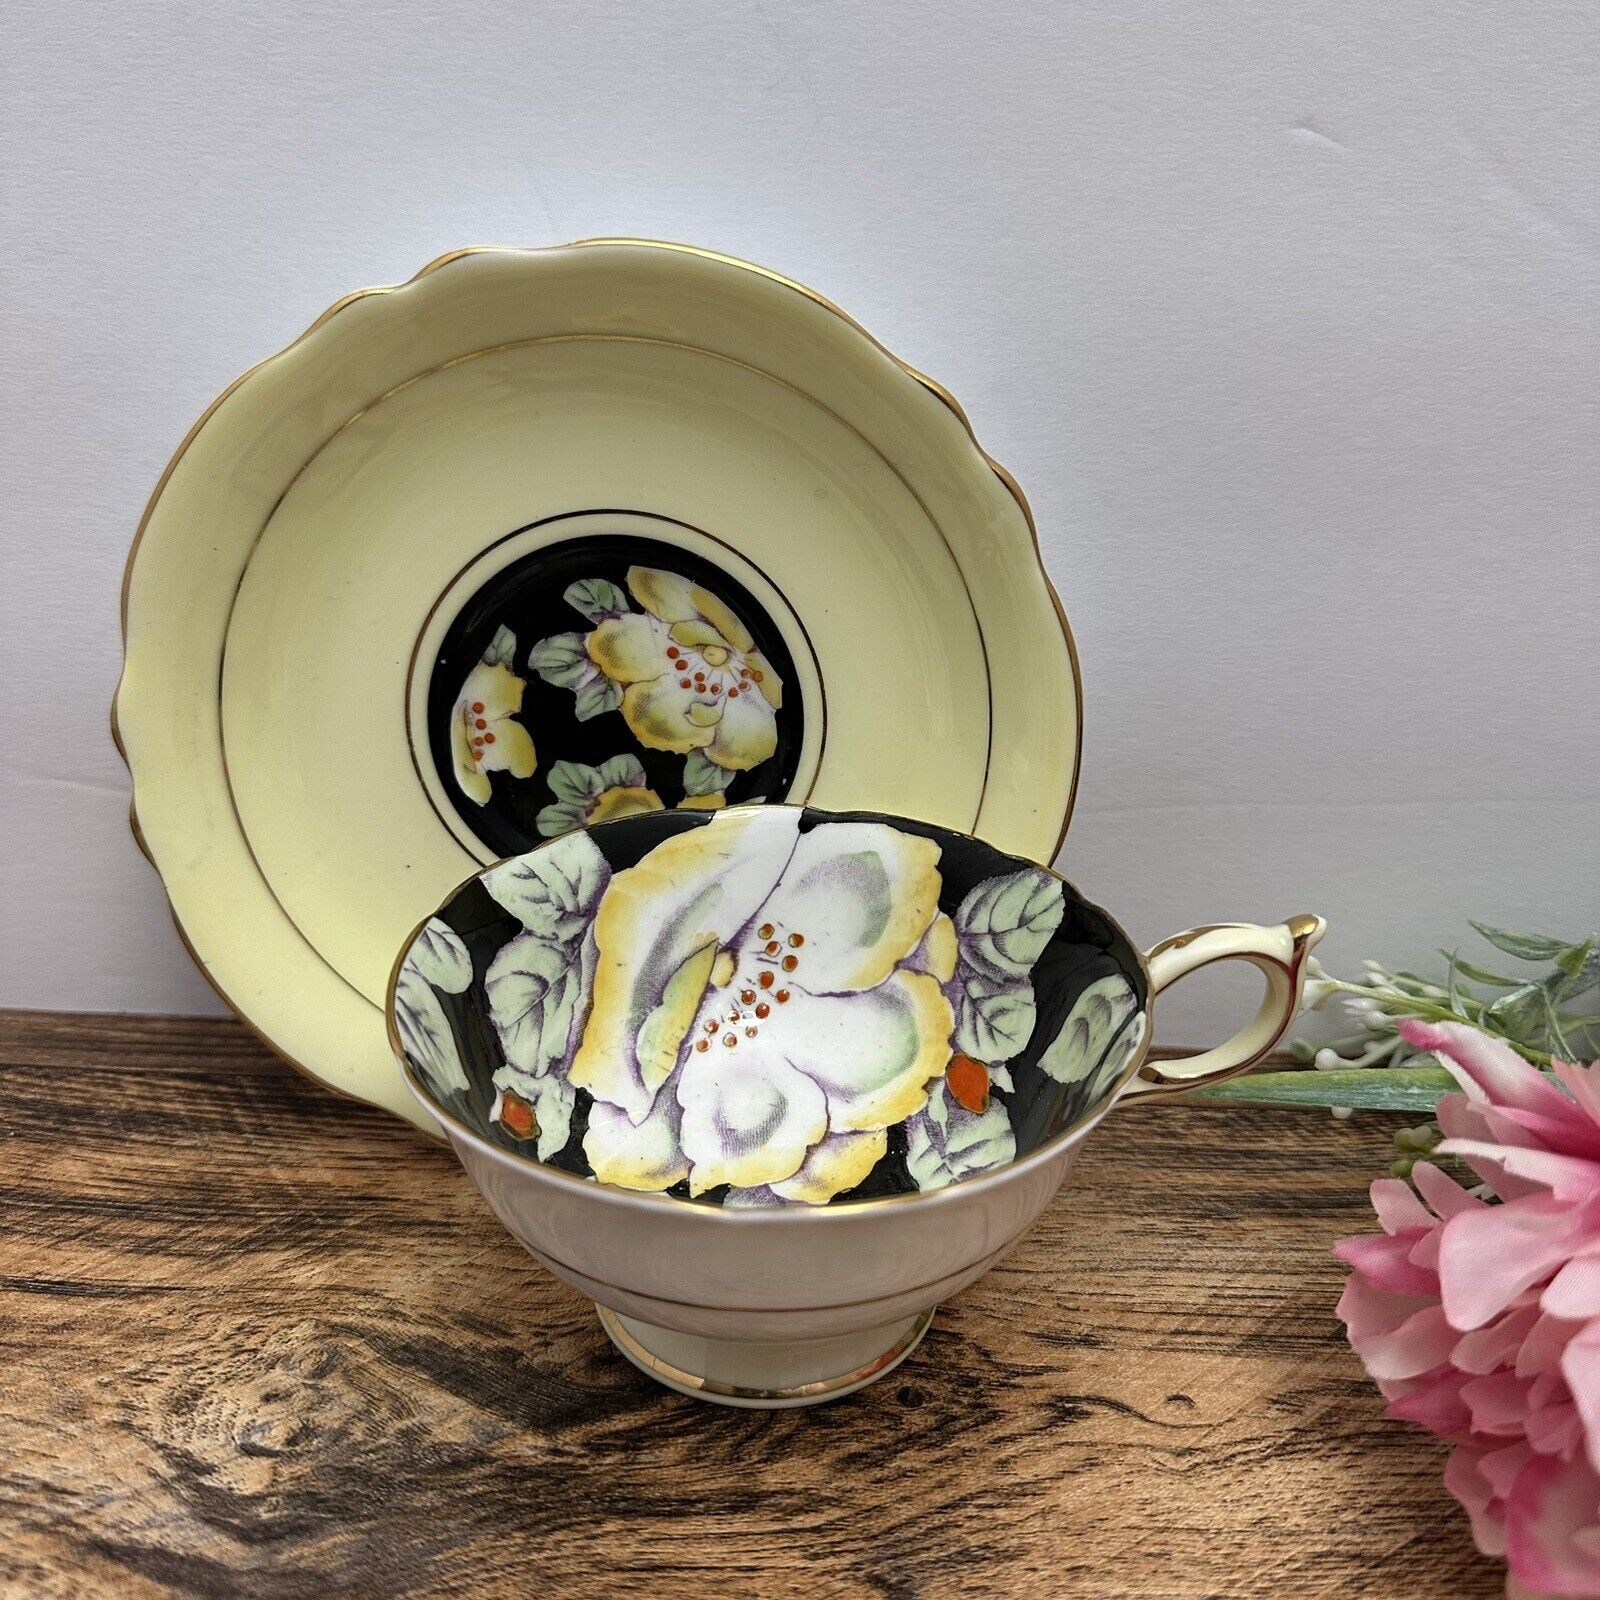 PARAGON - Vintage Daffodils Tulip Tea Cup & Saucer - Black & Yellow Flowers